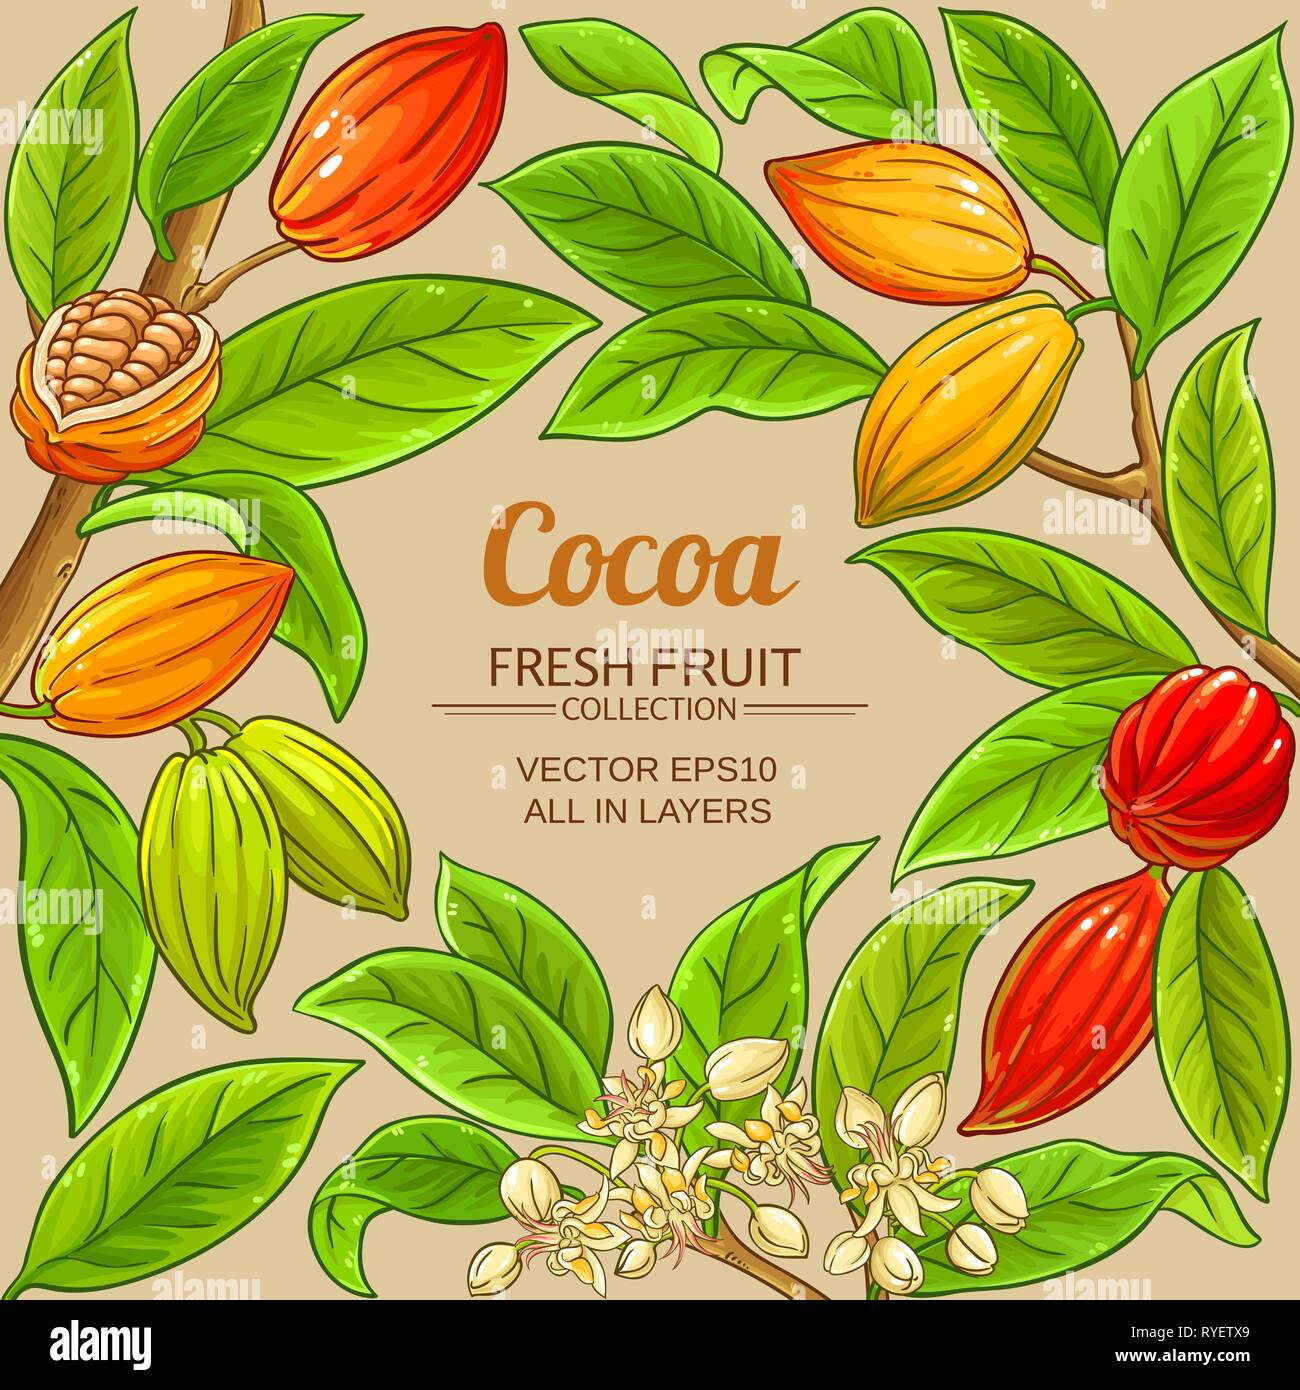 cocoa vector frame on color background Stock Vector